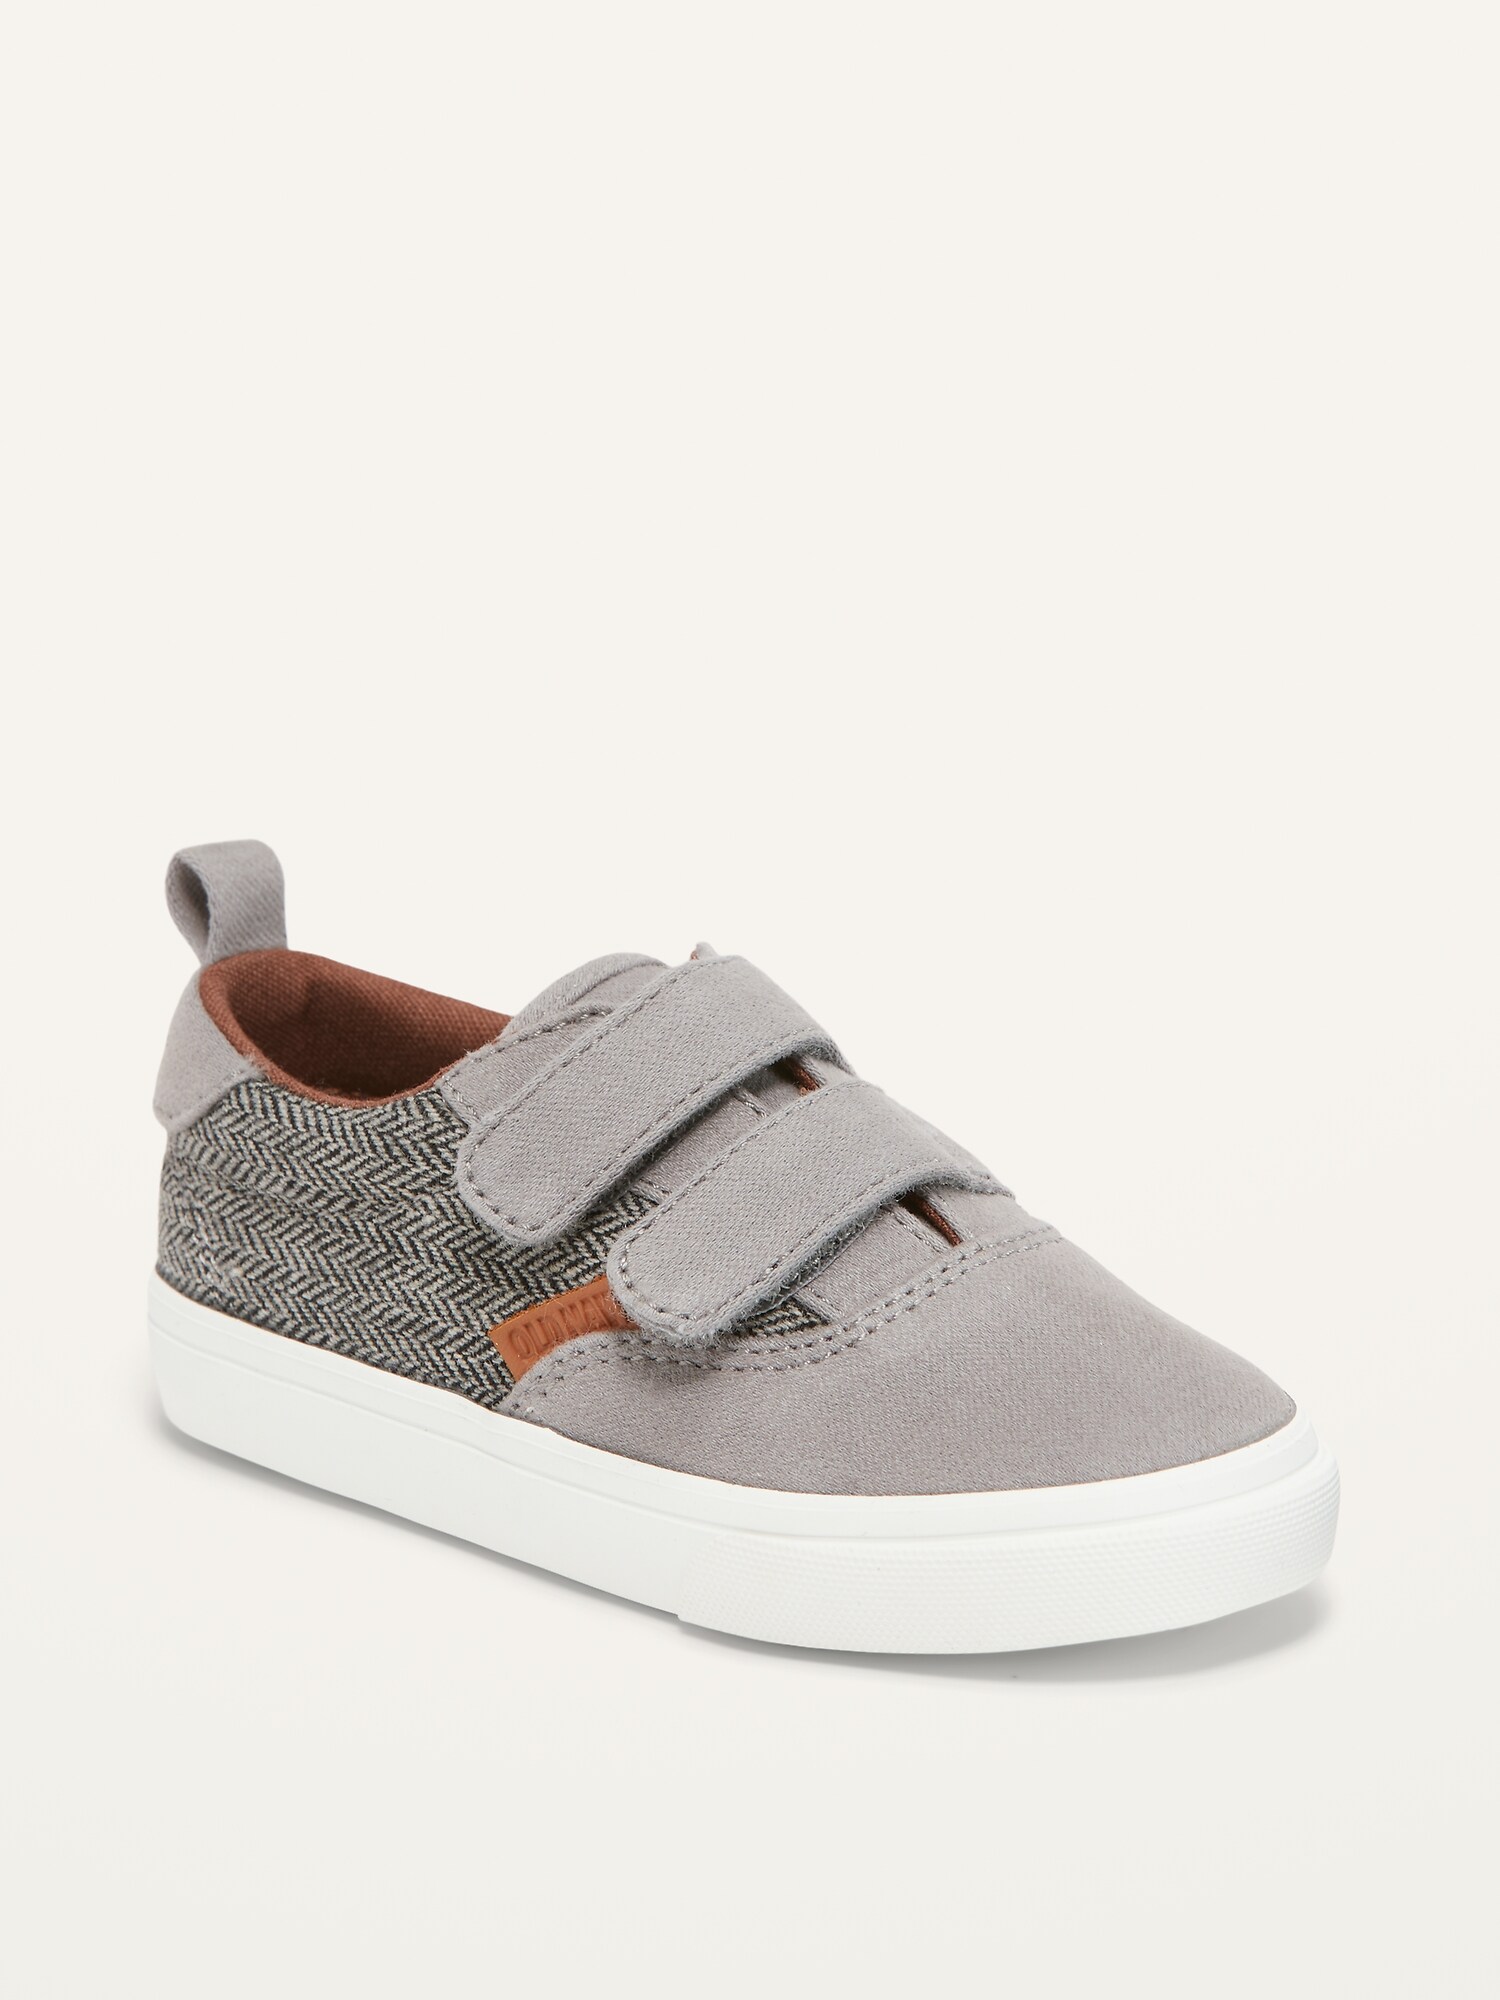 Unisex Double-Strap Sneakers for Baby